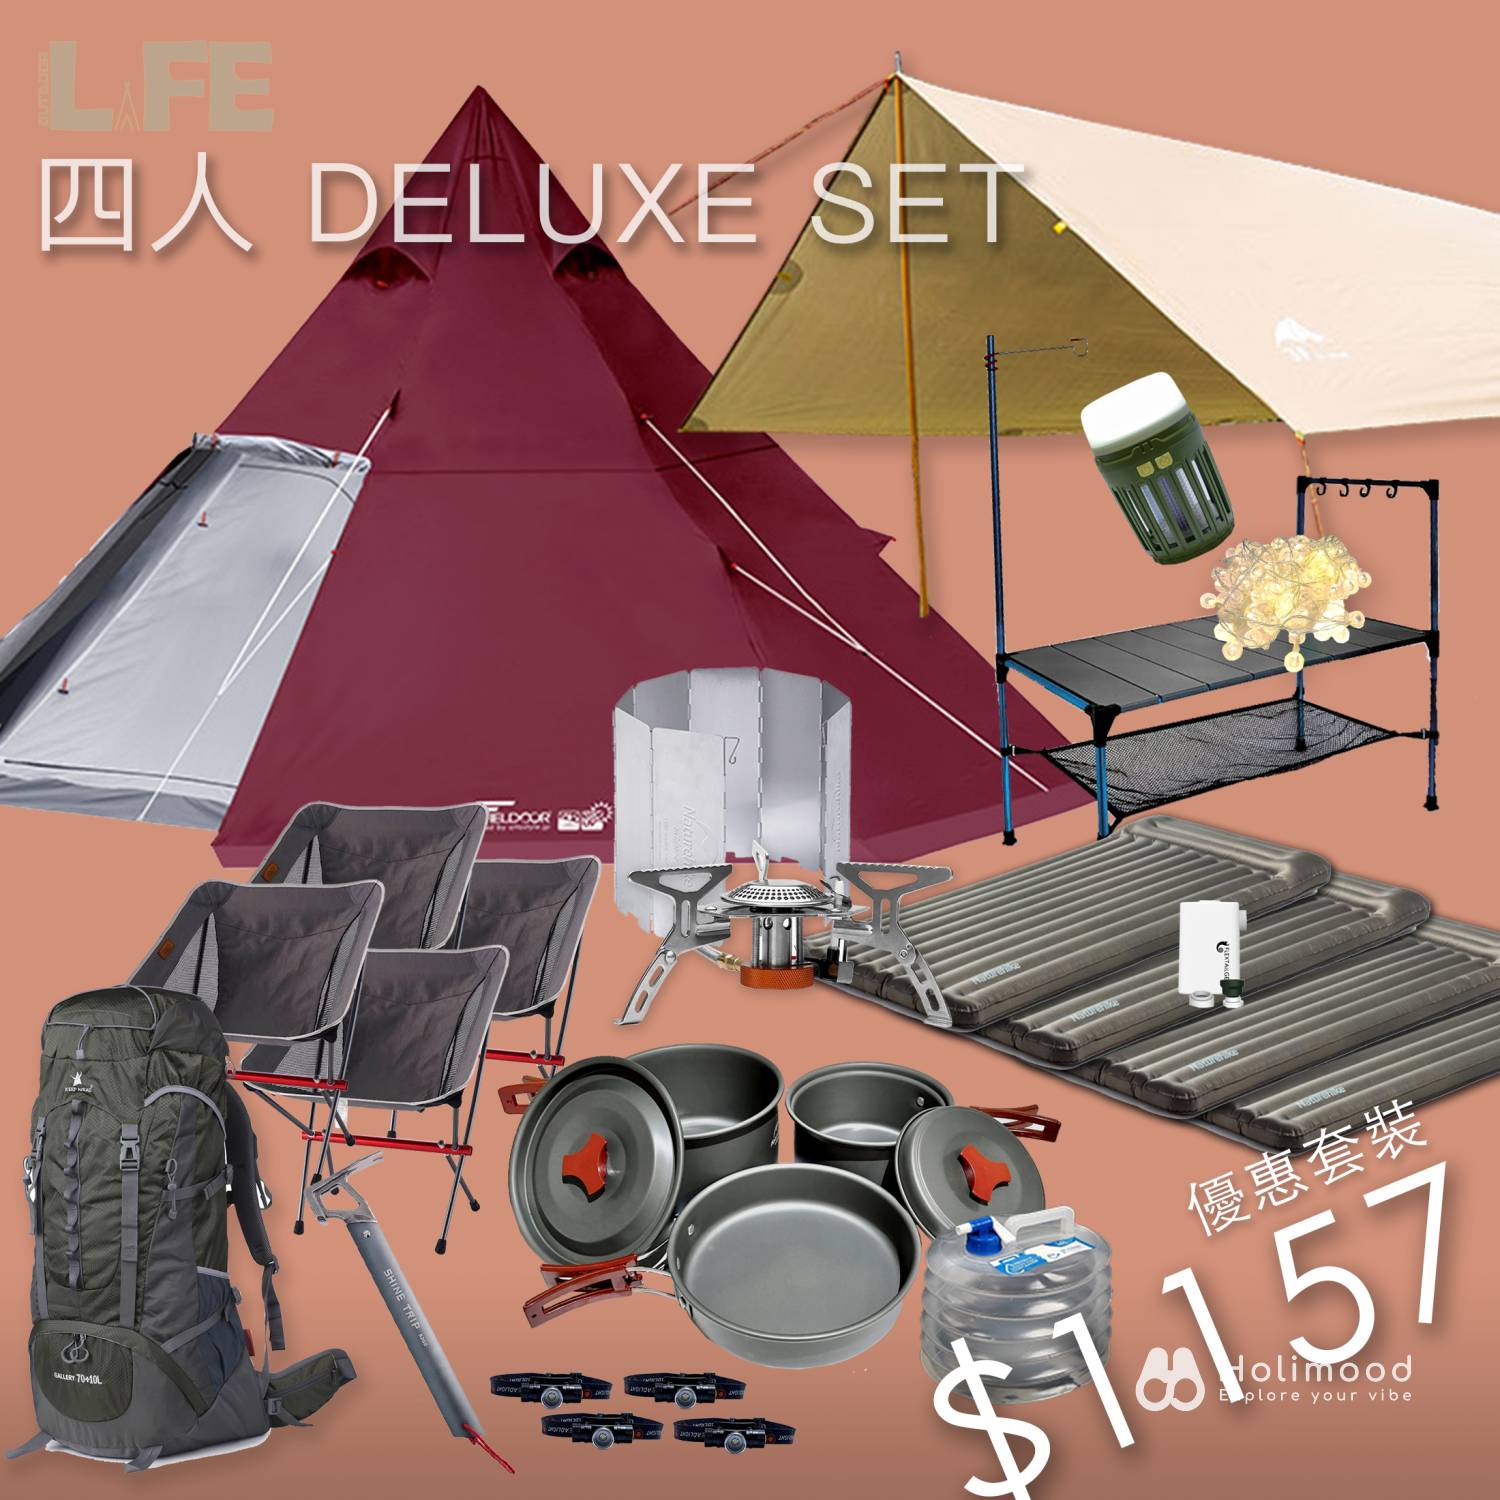 Life Outdoor *Kwai Fong / Central Pickup* - 4 Persons Camping Equipment Rental Set 4